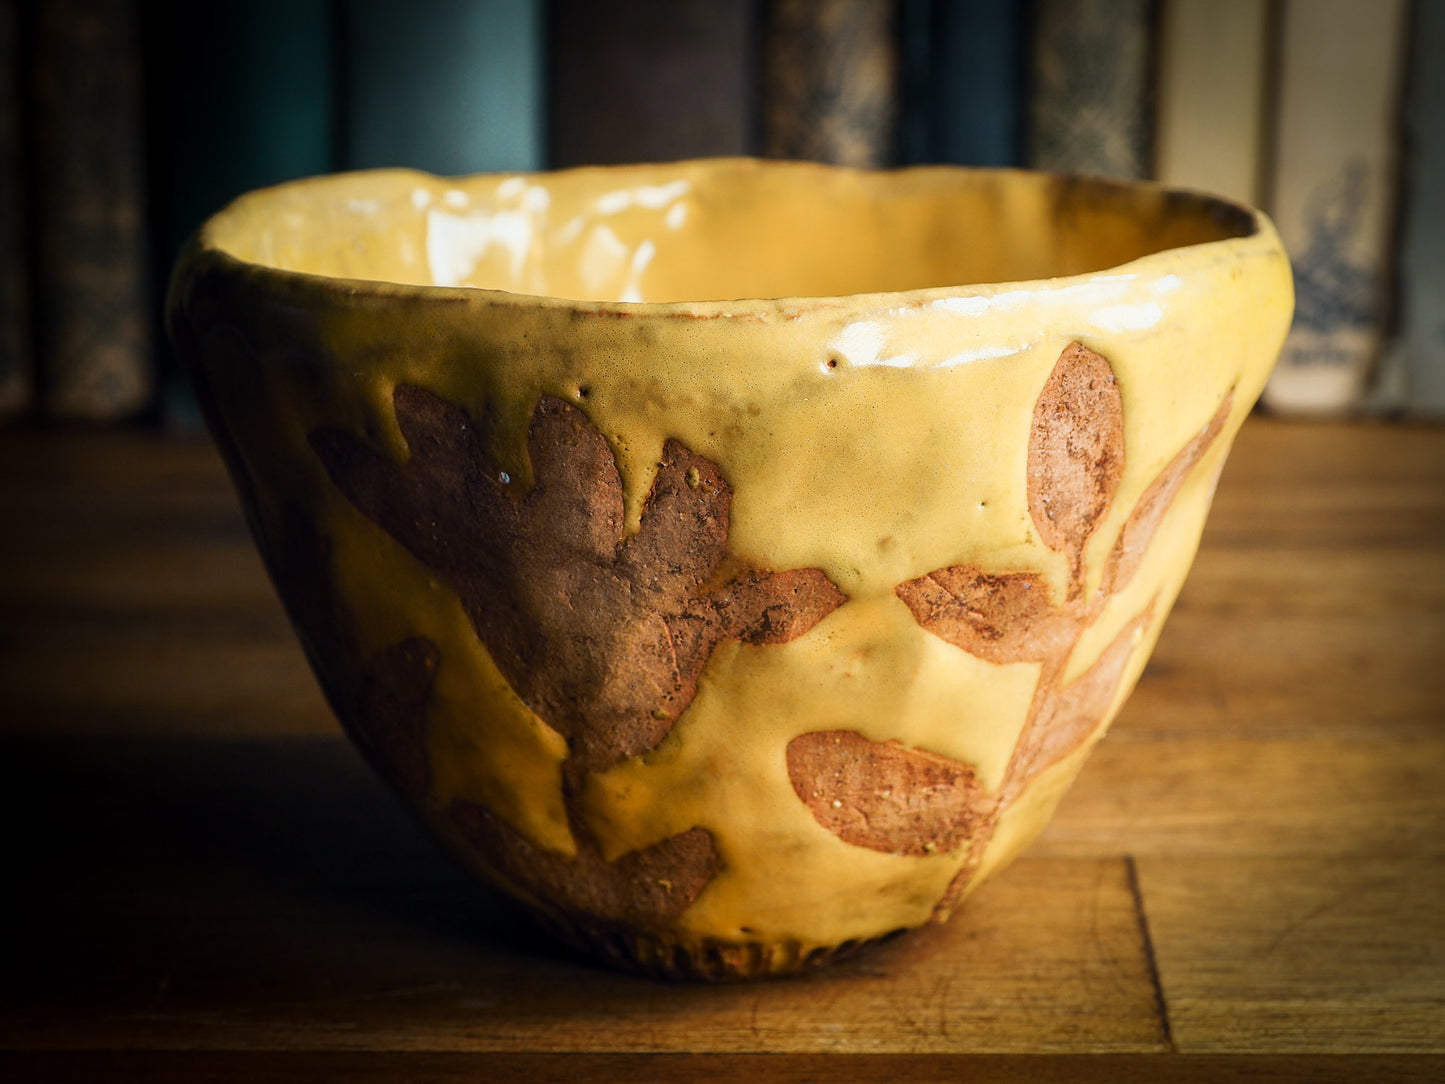 Original fired earthenware ceramic hand pinched bowl with yellow and brown flowers glazed and hand painted motif by Idania Salcido, the artist behind danita Art.